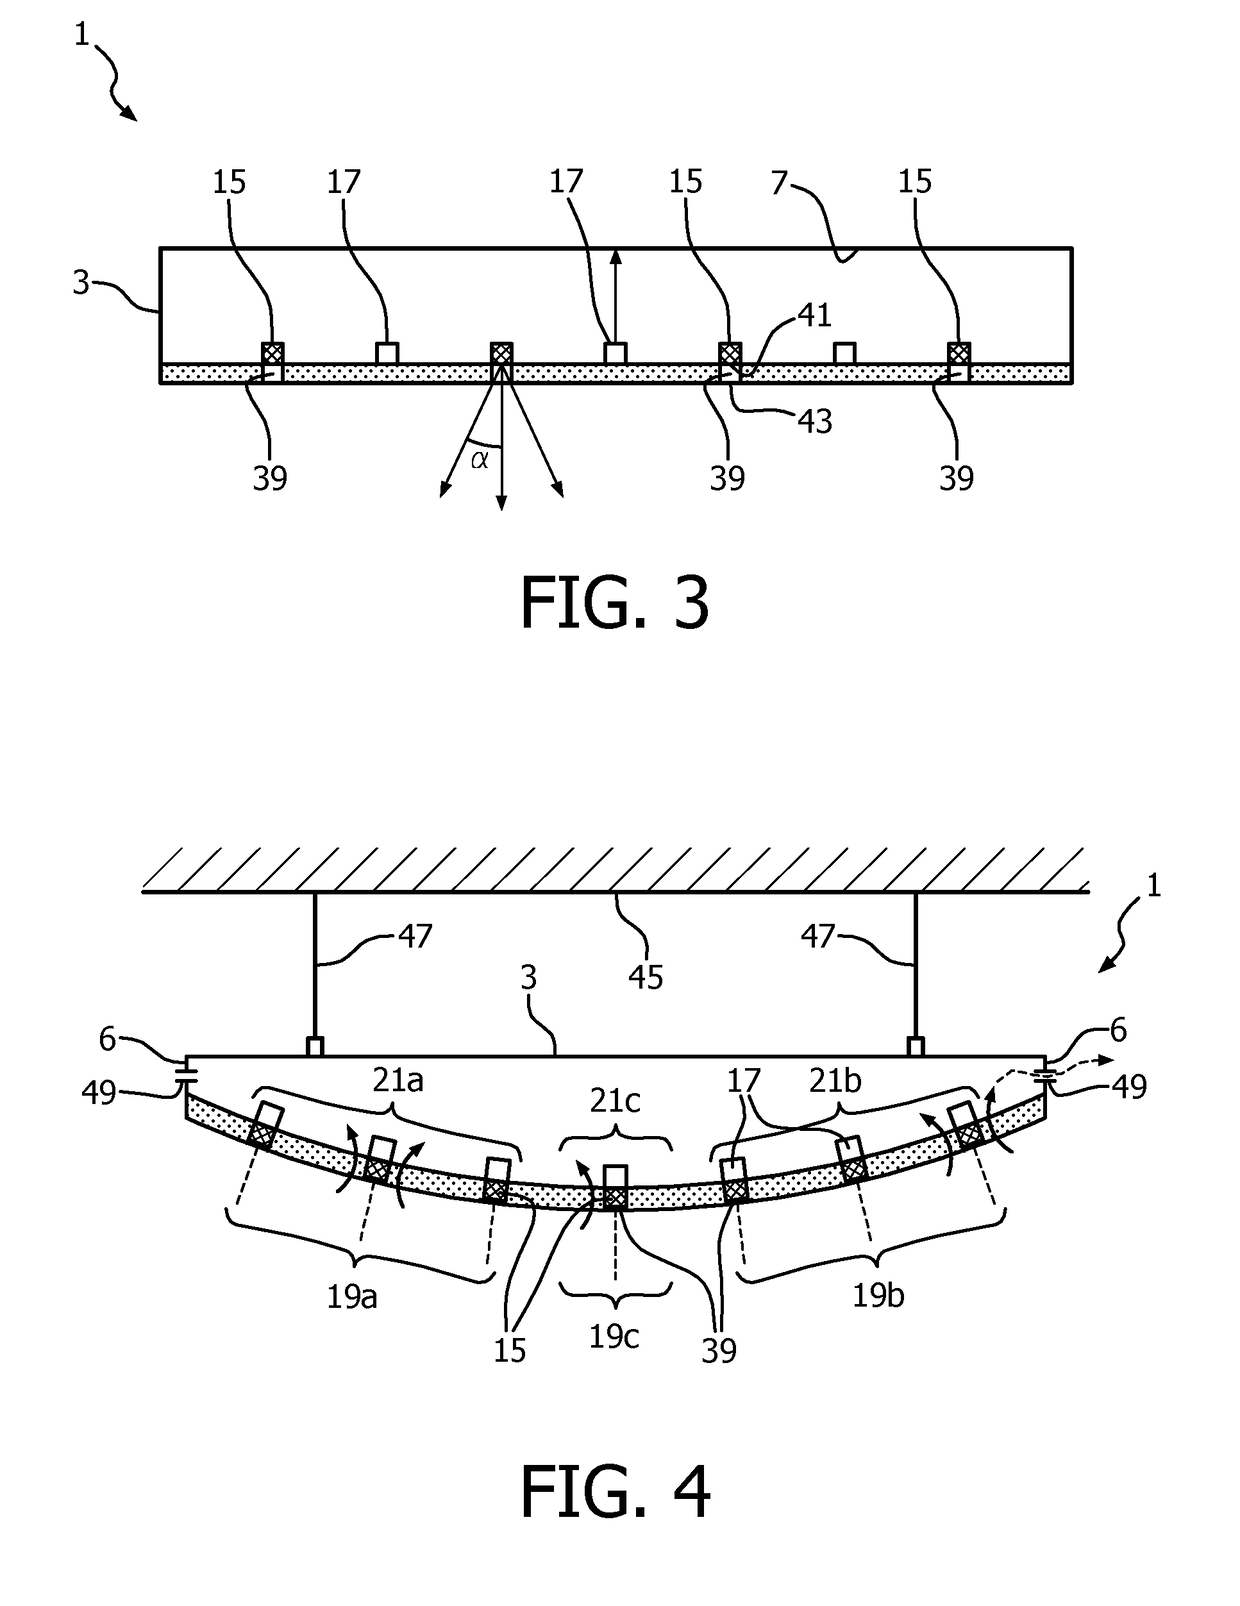 Lighting device and lighting system